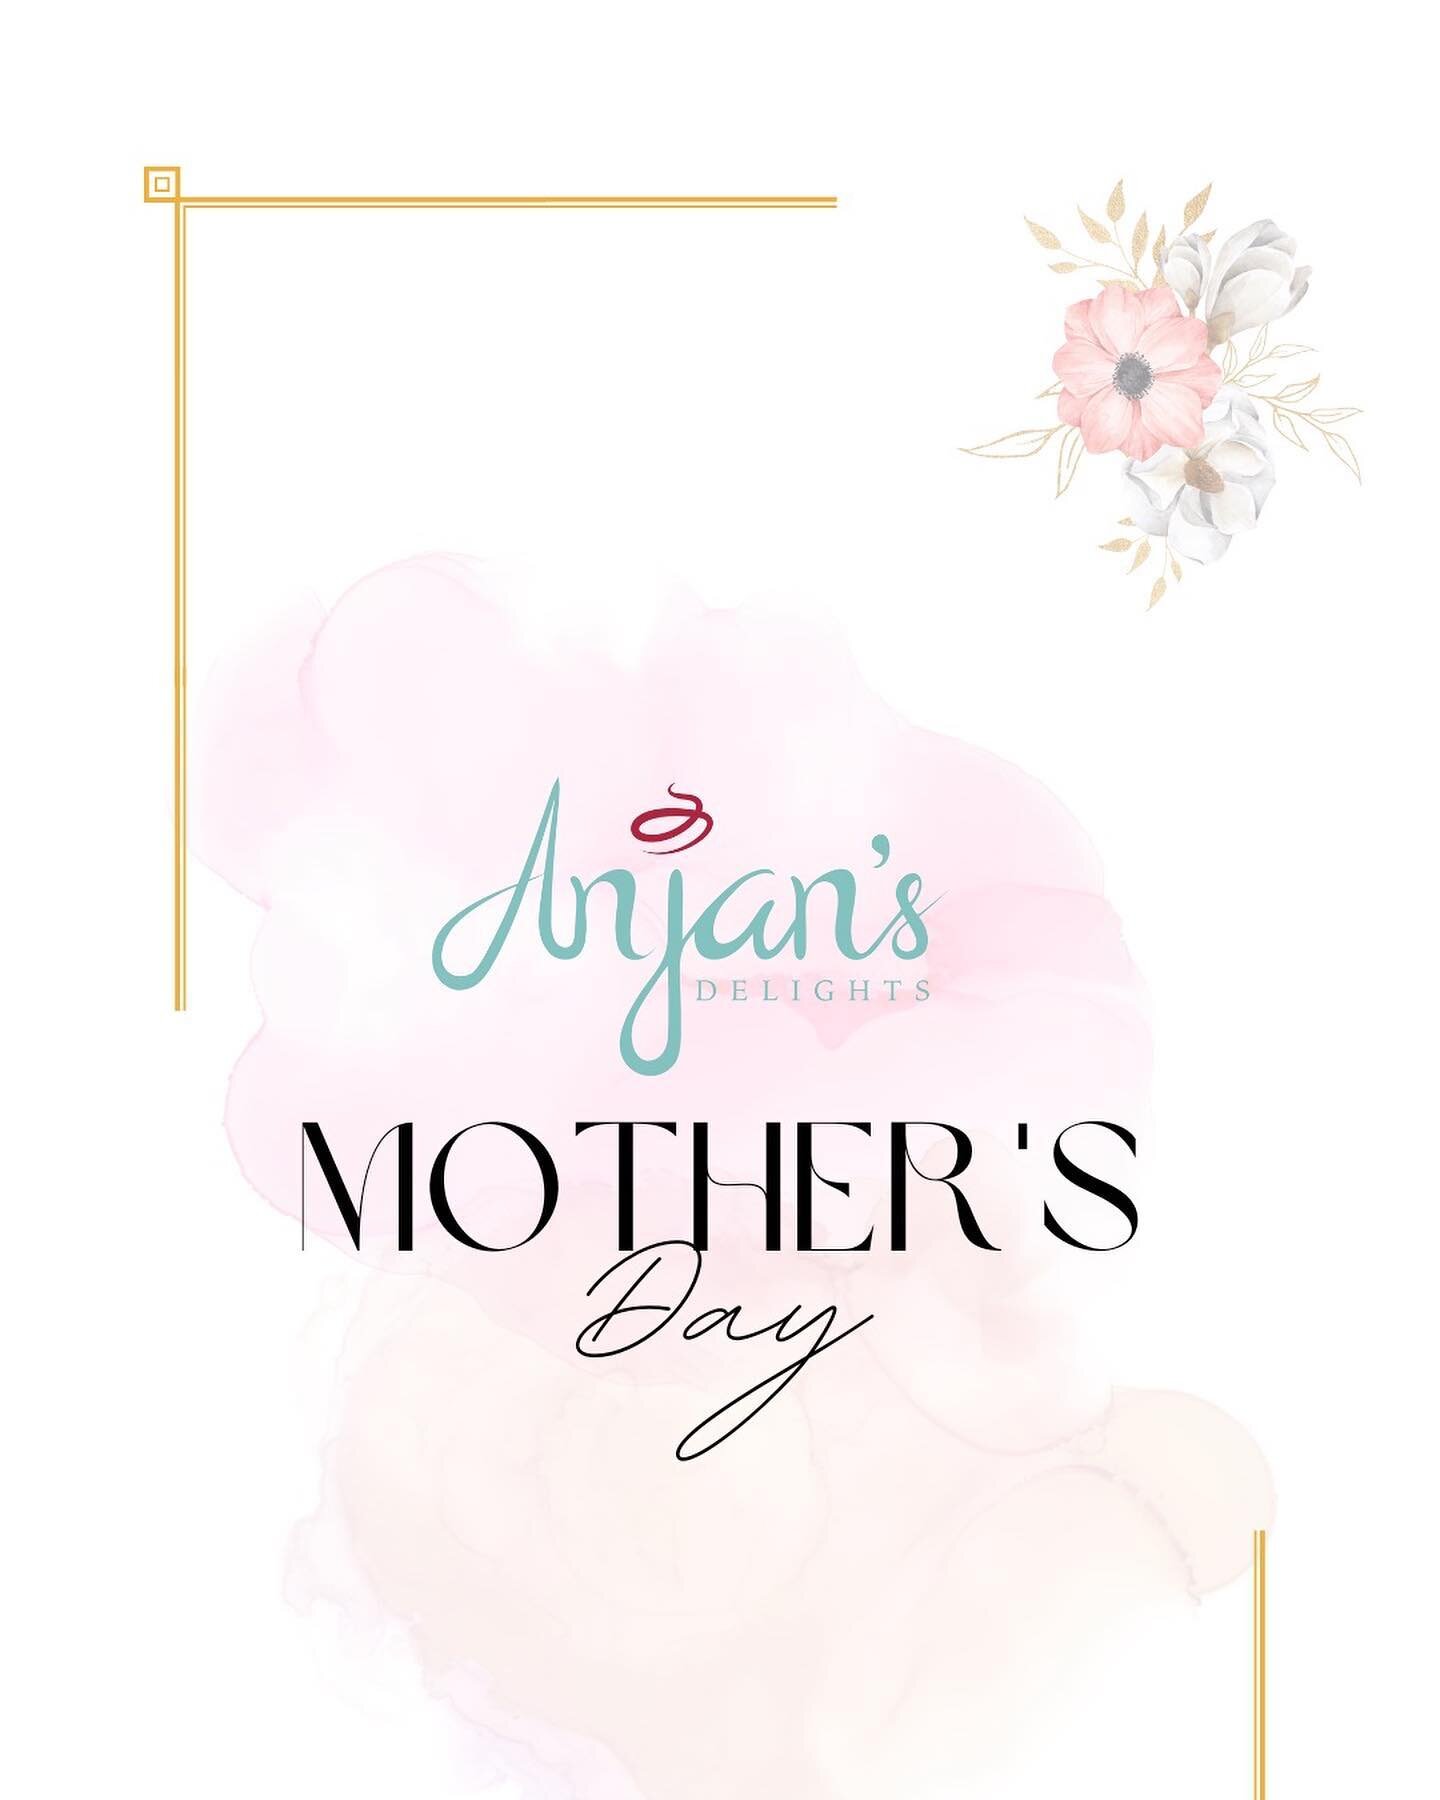 MOTHER&rsquo;S DAY 2023 COLLECTION! 

Introducing our 2023 Mother&rsquo;s Day Collection! 
I am super excited this year as I get to celebrate with 2 wonderful woman my mom and mother in law. We made the collection based on the flavours they like. 

T